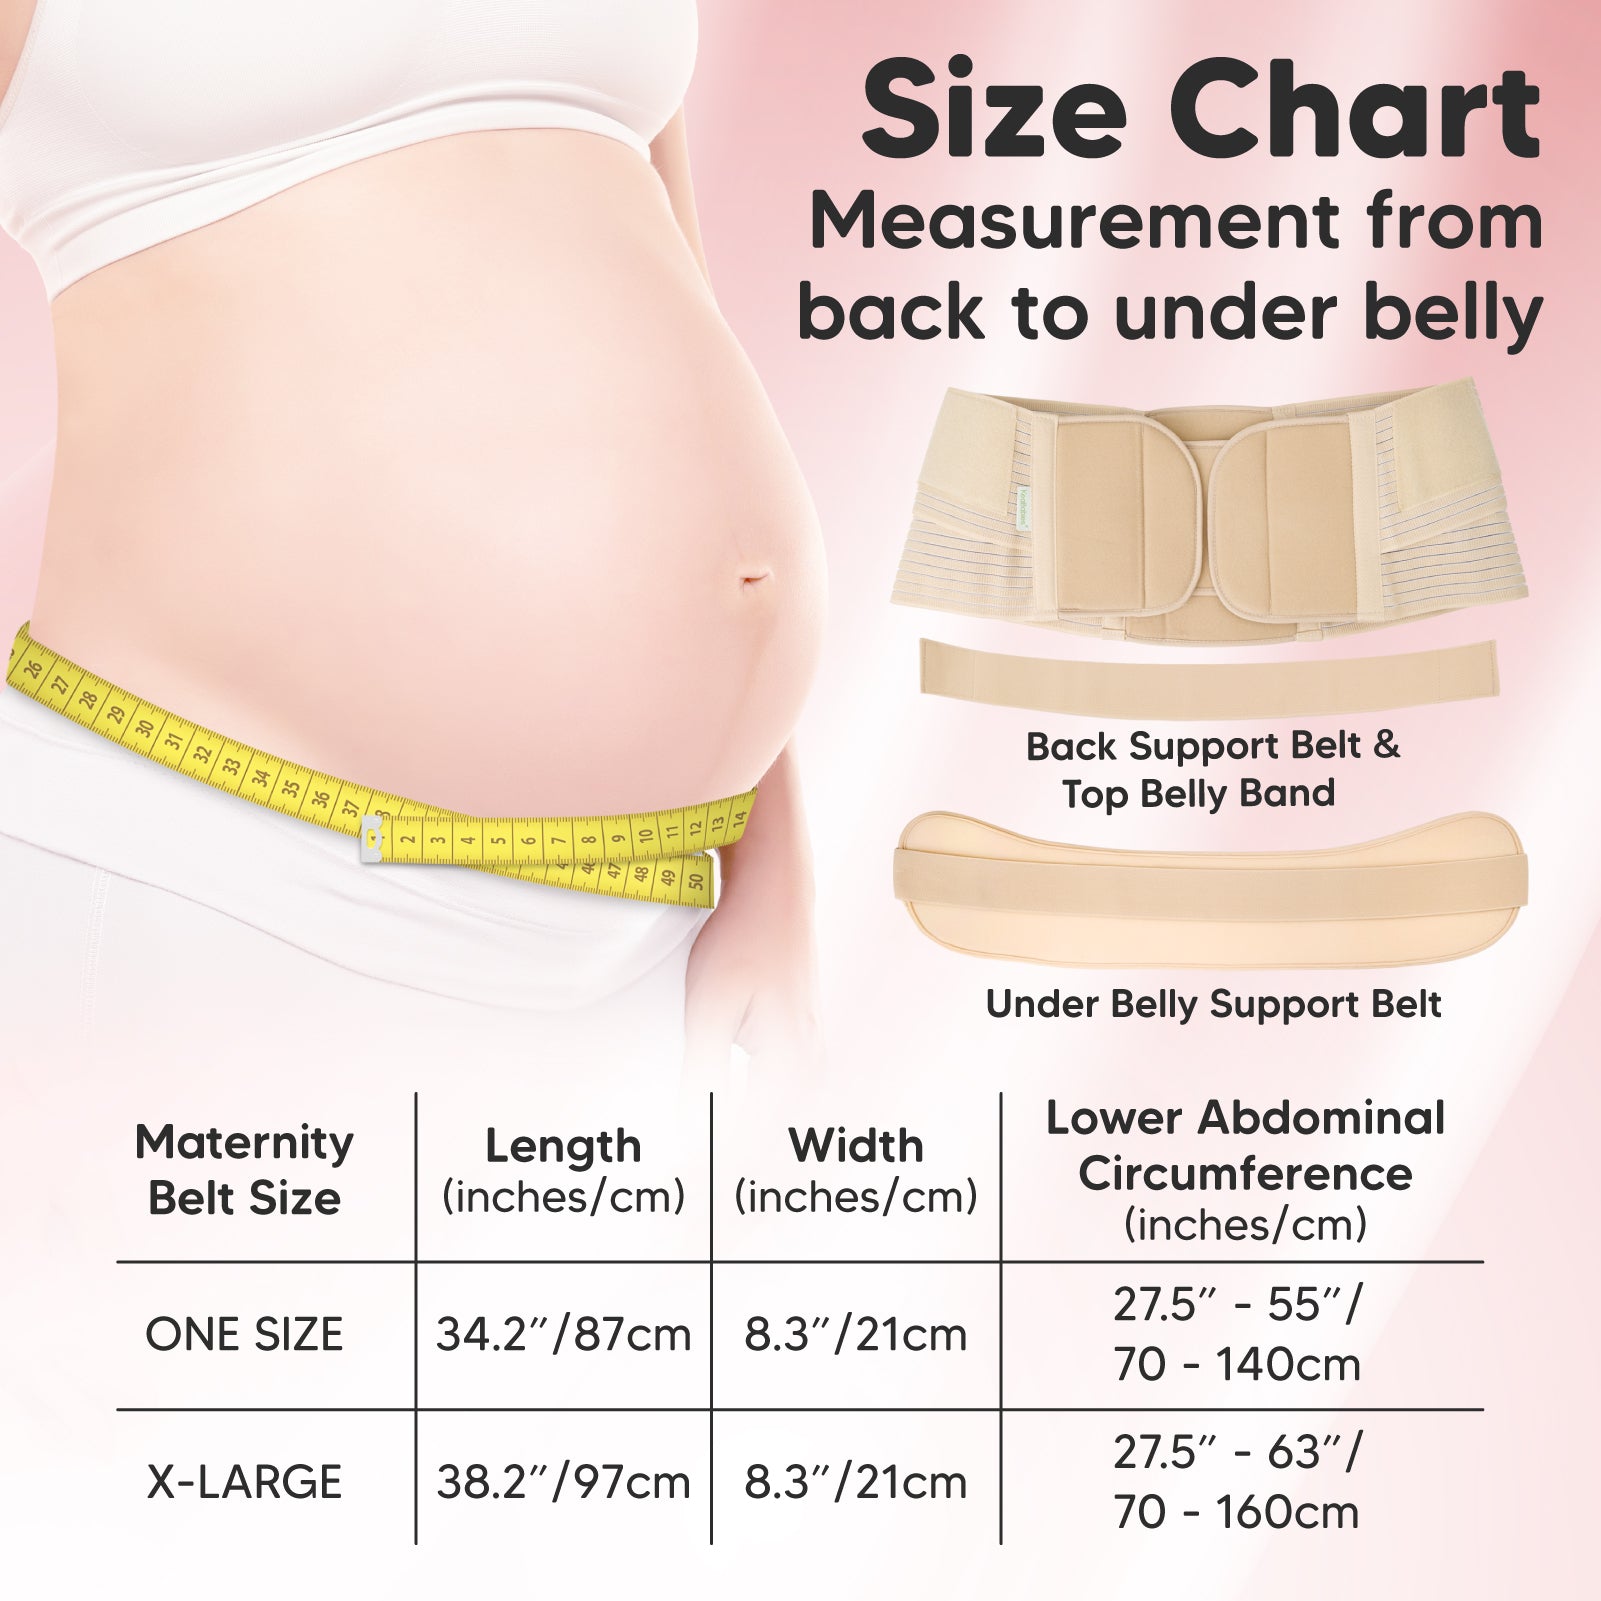 TWO-IN-ONE Belly Wrap: Pregnancy support belt By Quilt Comfort